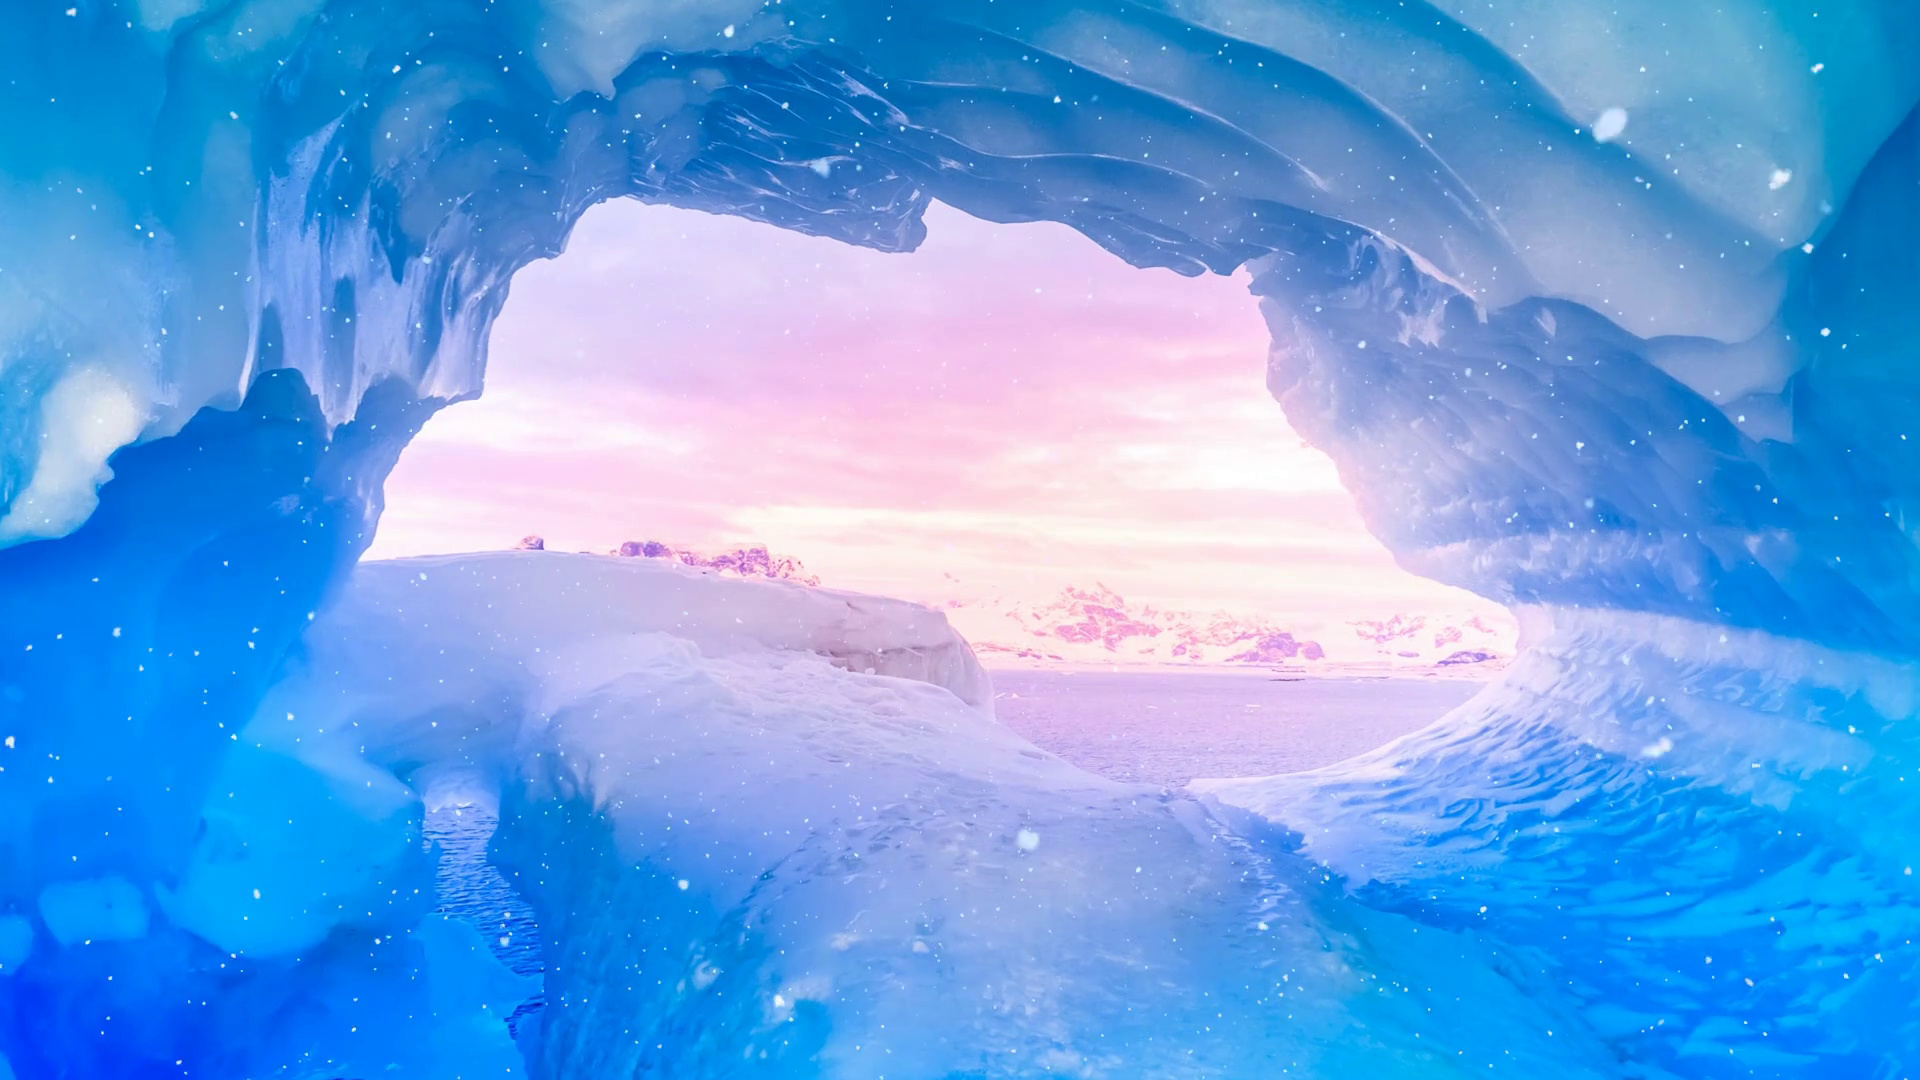 Ice Cave, Nature's spectacle, Icy labyrinth, Subterranean mystery, 1920x1080 Full HD Desktop